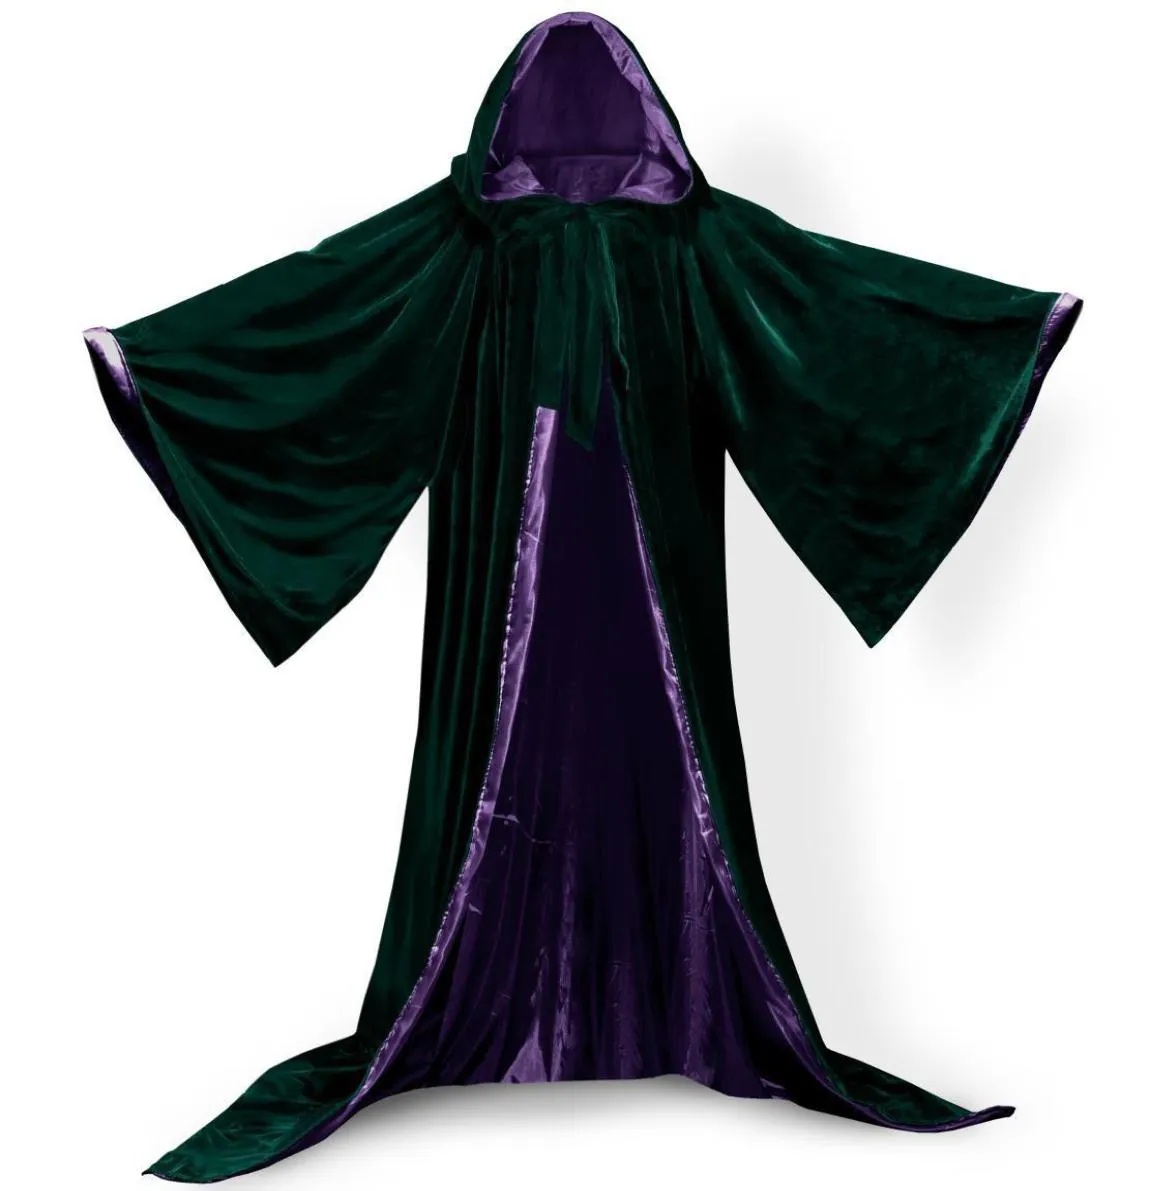 Manches longues Velvet Hooded Cloak Cuscosplay Womenmens Cloak Velvet Cosplay Costume Costume de fantaisie Hooides Cape9017791